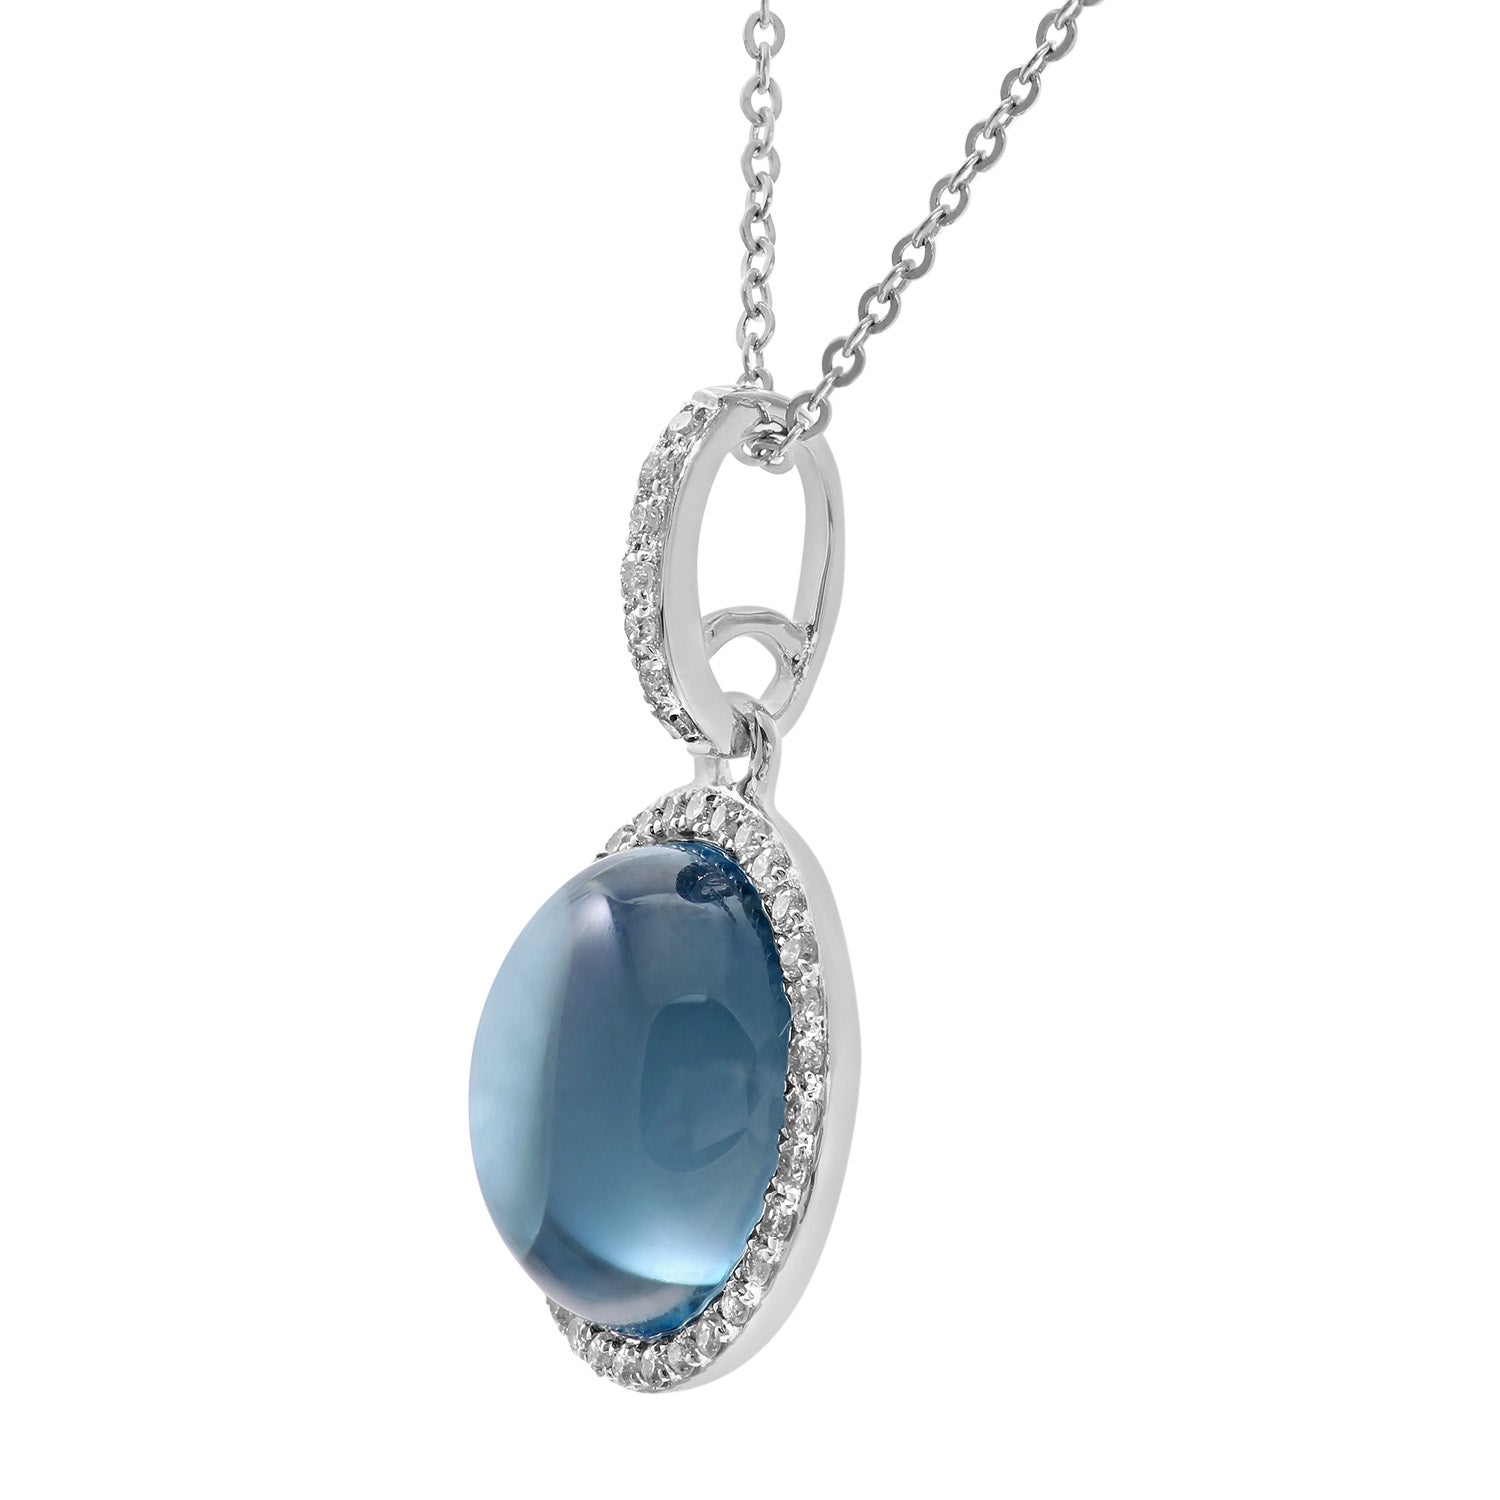 9ct White Gold Diamond and 3.75ct Round Blue Topaz Gemstone Pendant with Chain of 46cm